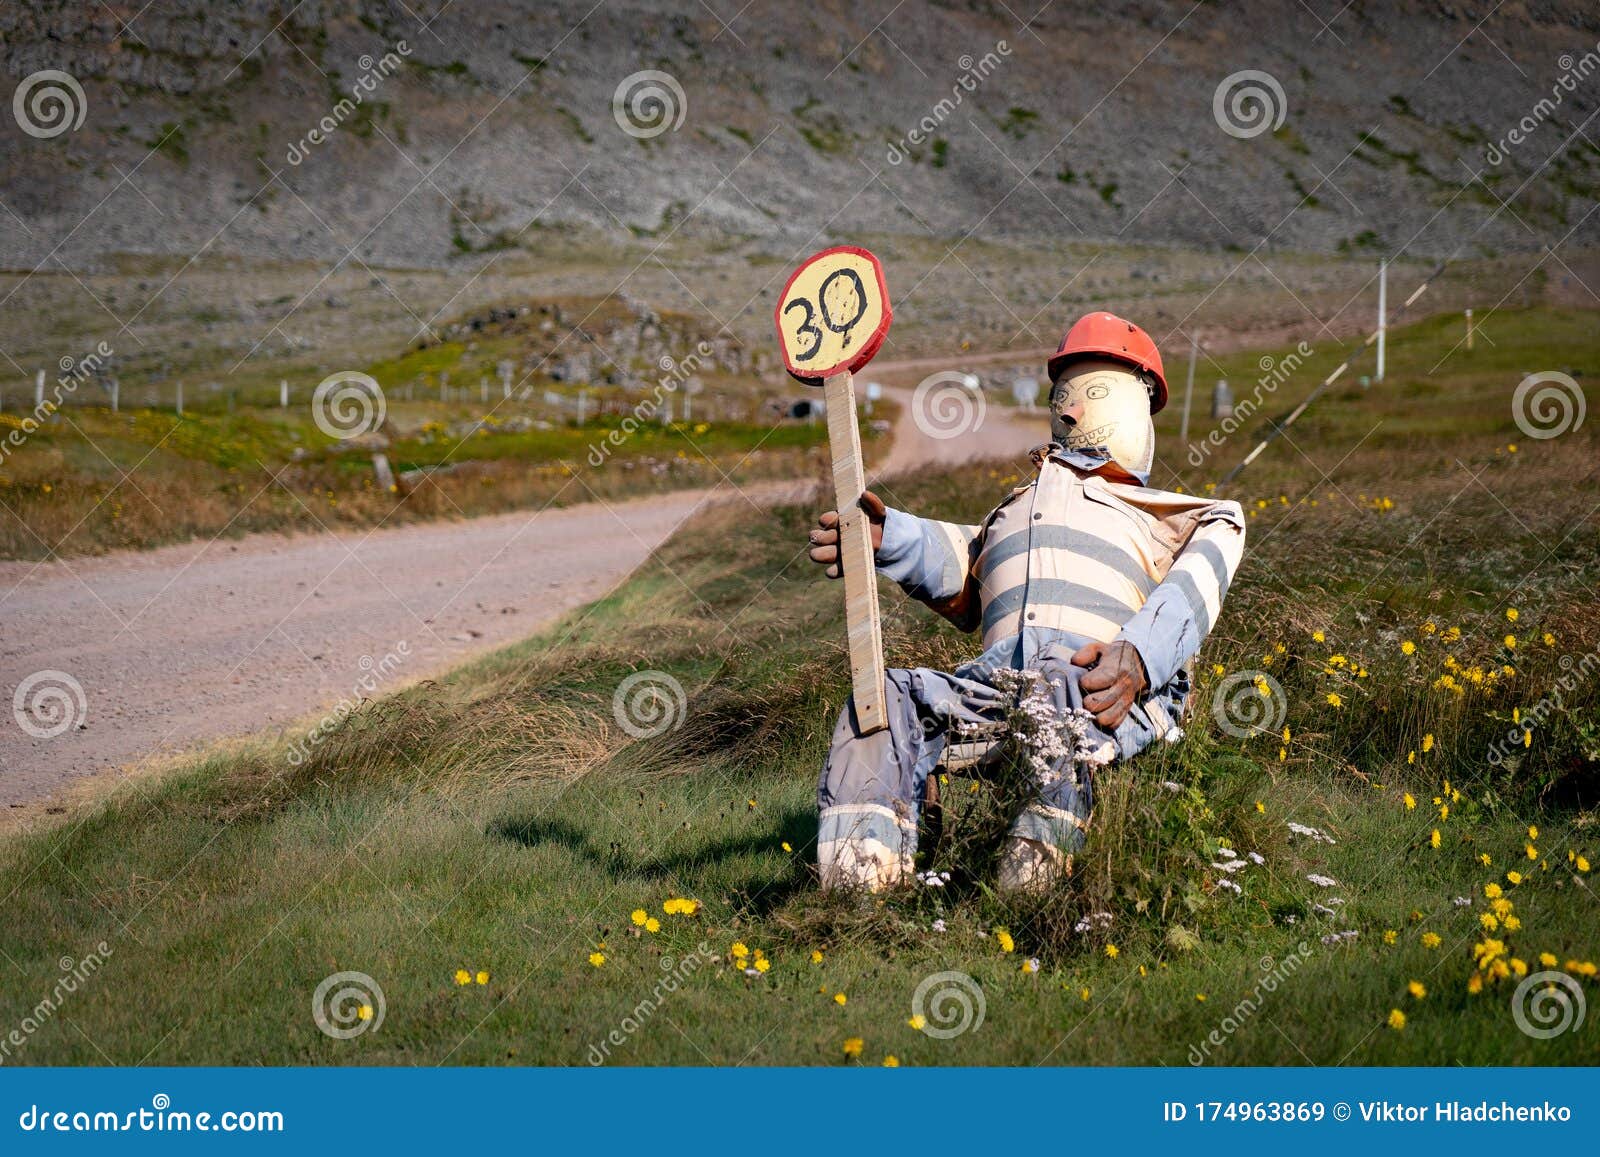 fanny traffic controller made as a doll along the road in iceland